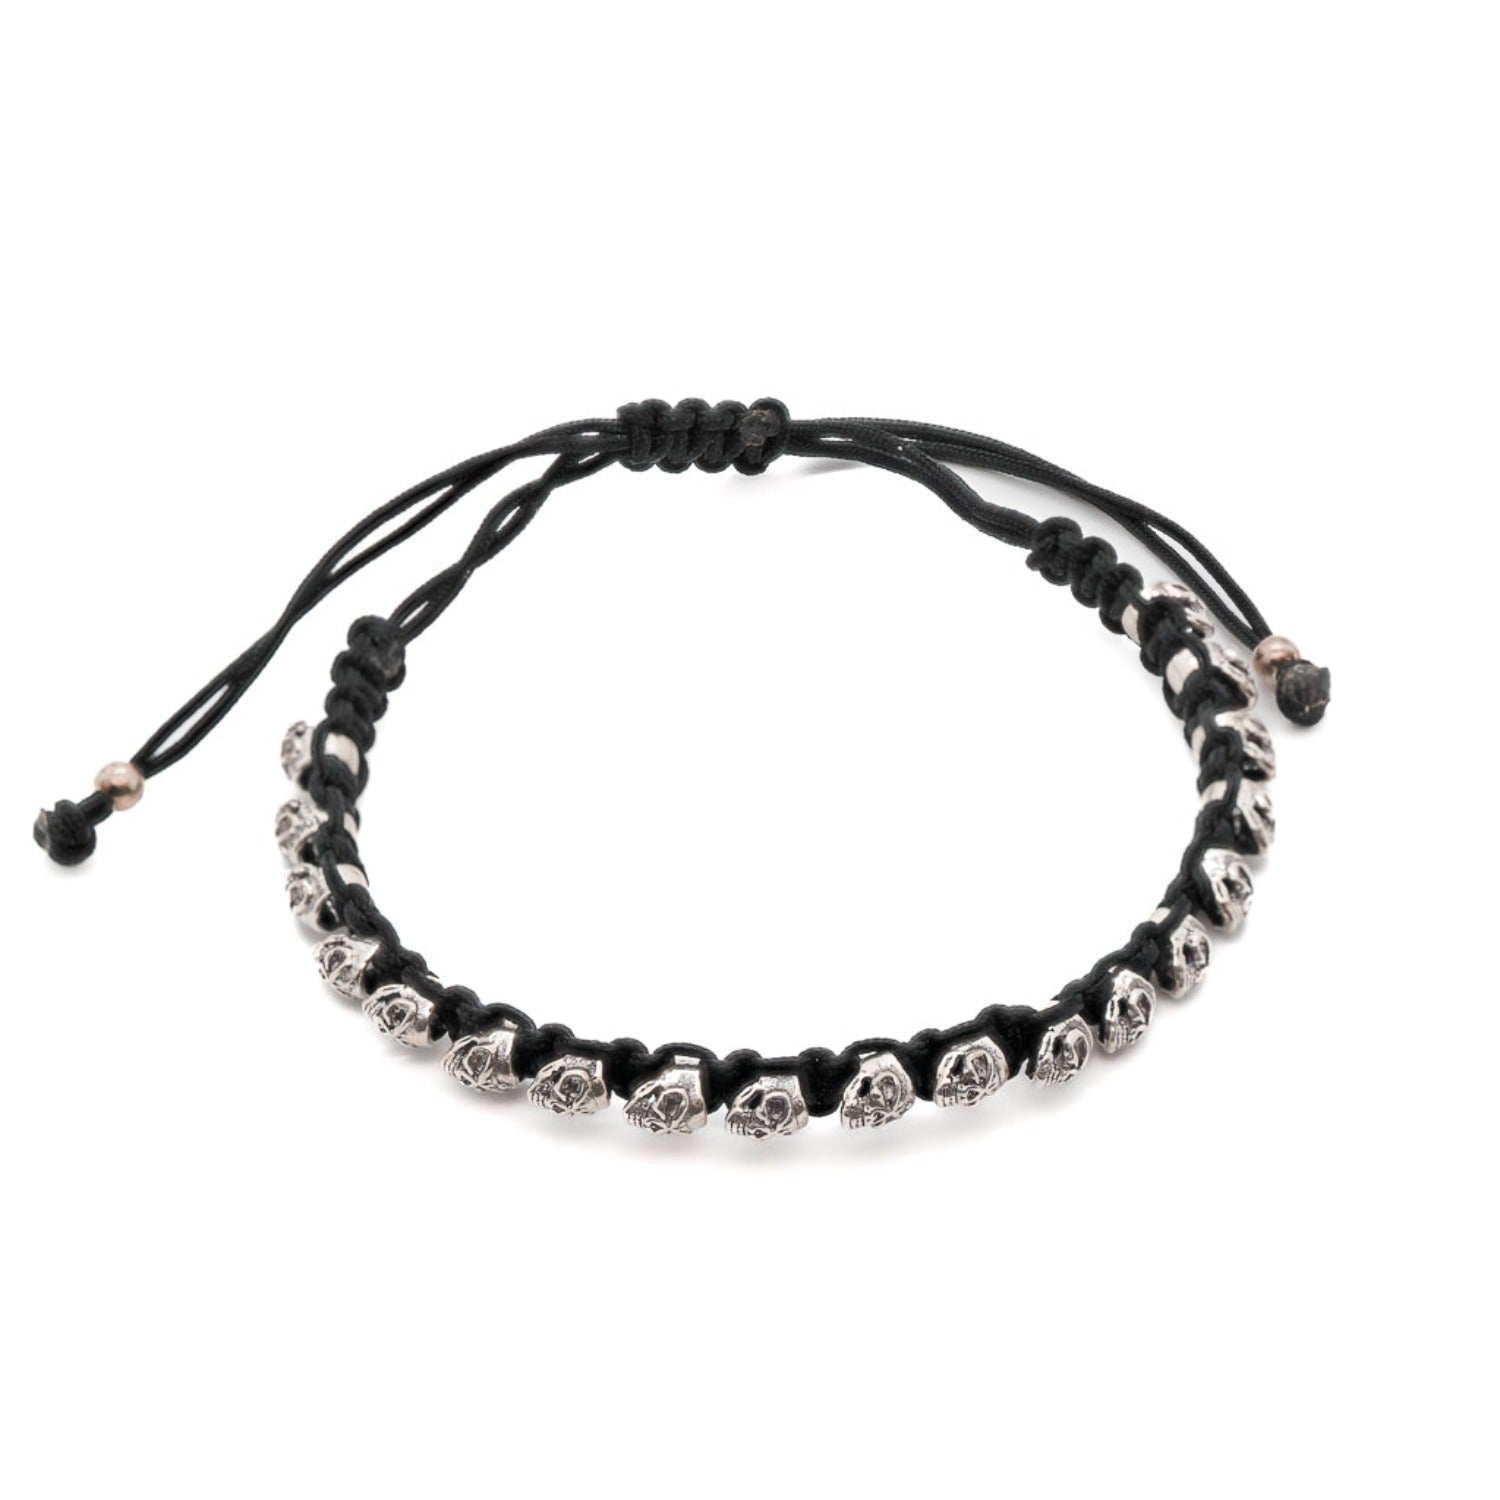 Black and silver skull bracelet with handmade knotted rope and 925 Solid Sterling Silver skull charms.